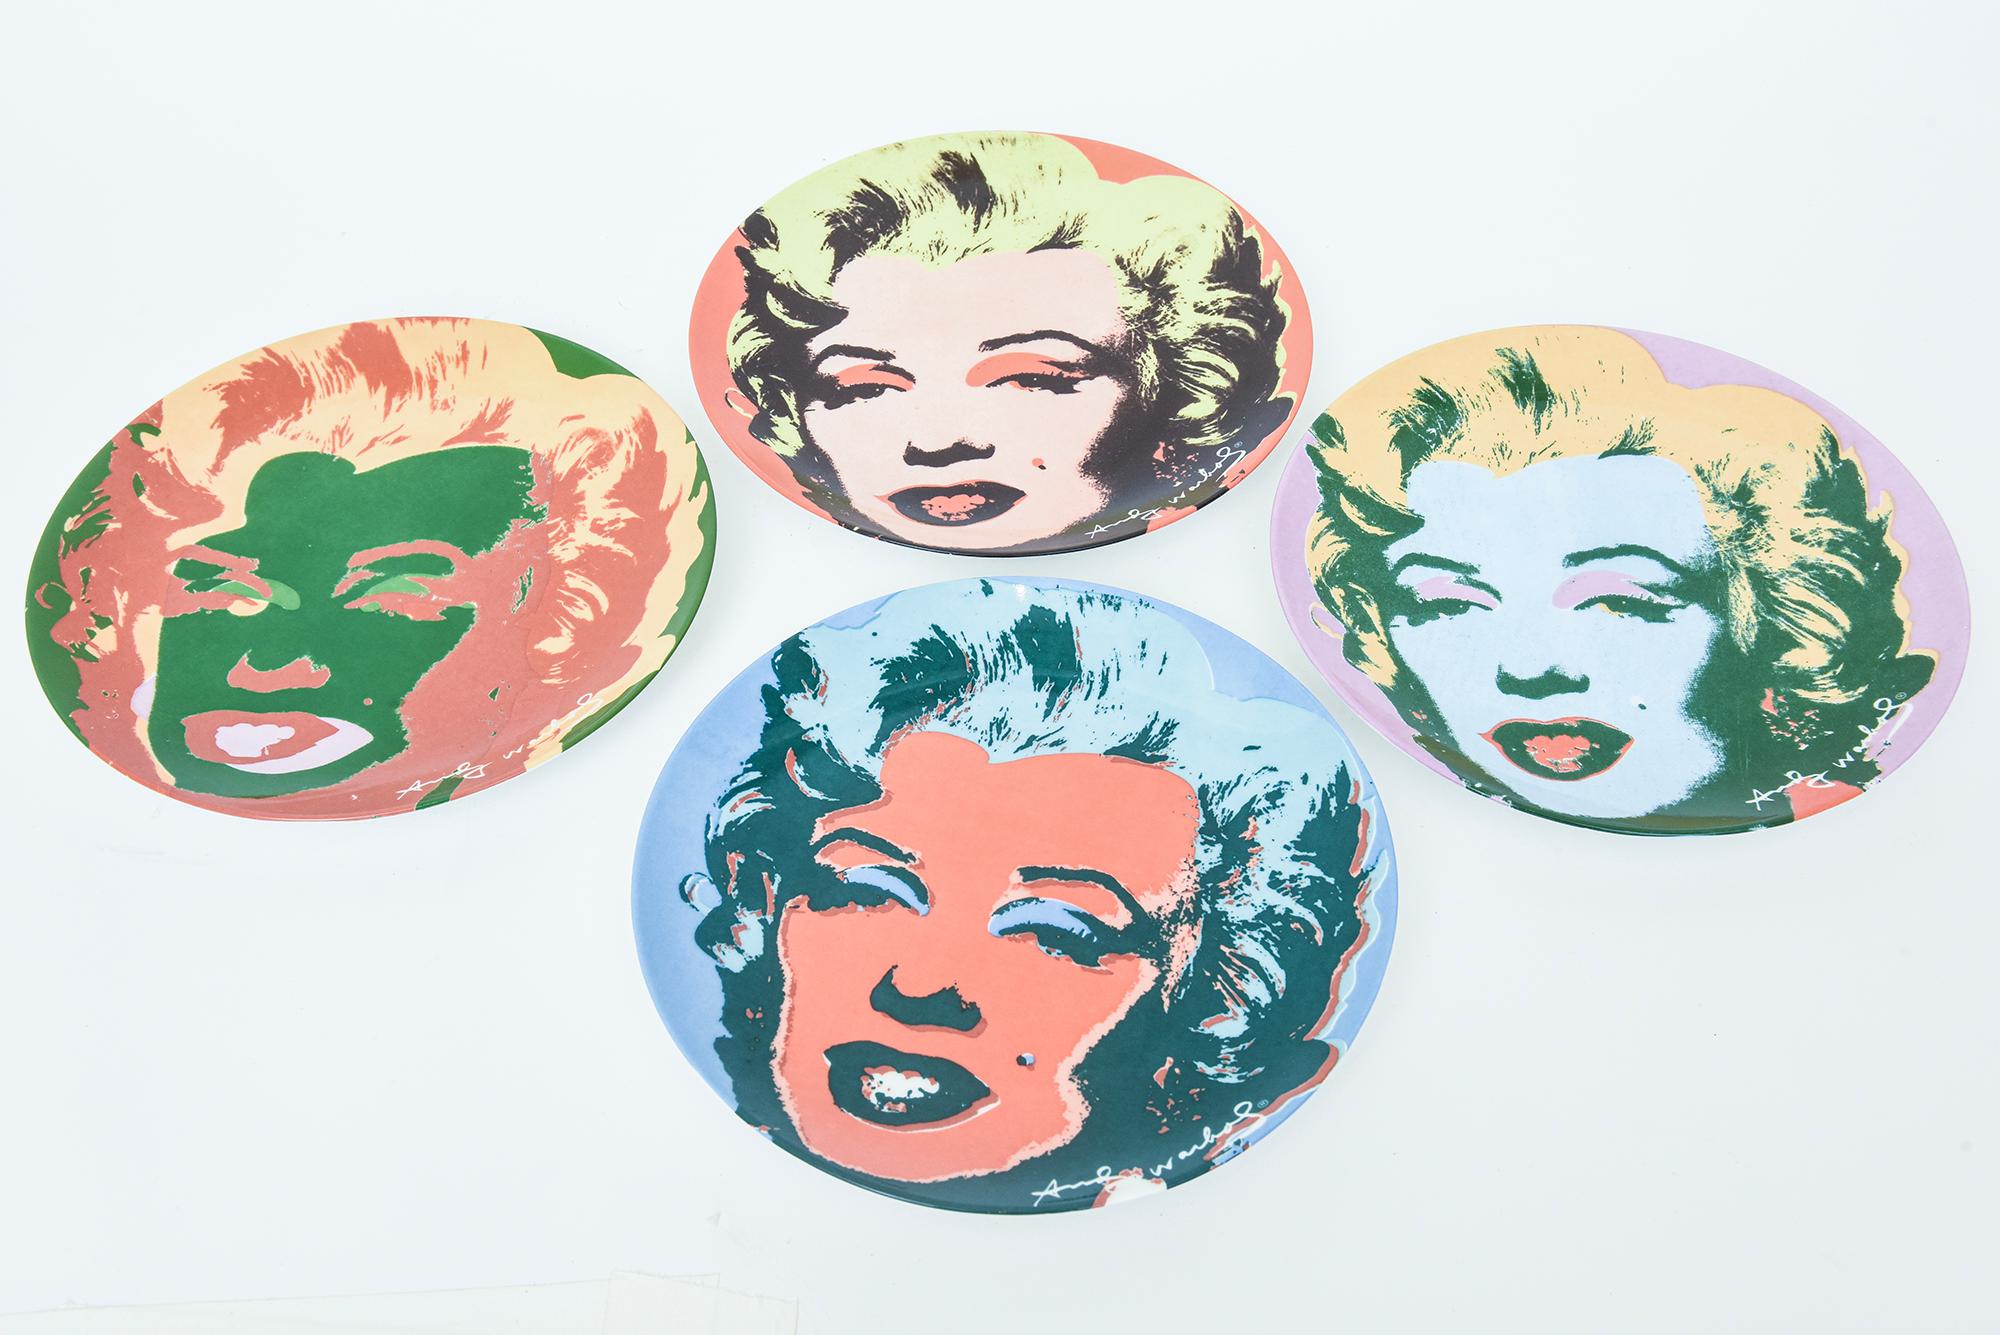 This set of 4 bone china appetizer, desert or salad plates or serving pieces are Andy Warhol' s Marilyn Monroe for Block and by Block Manufacturing all labeled on the back side and authorized by the Marilyn Monroe estate. These are colorful, playful